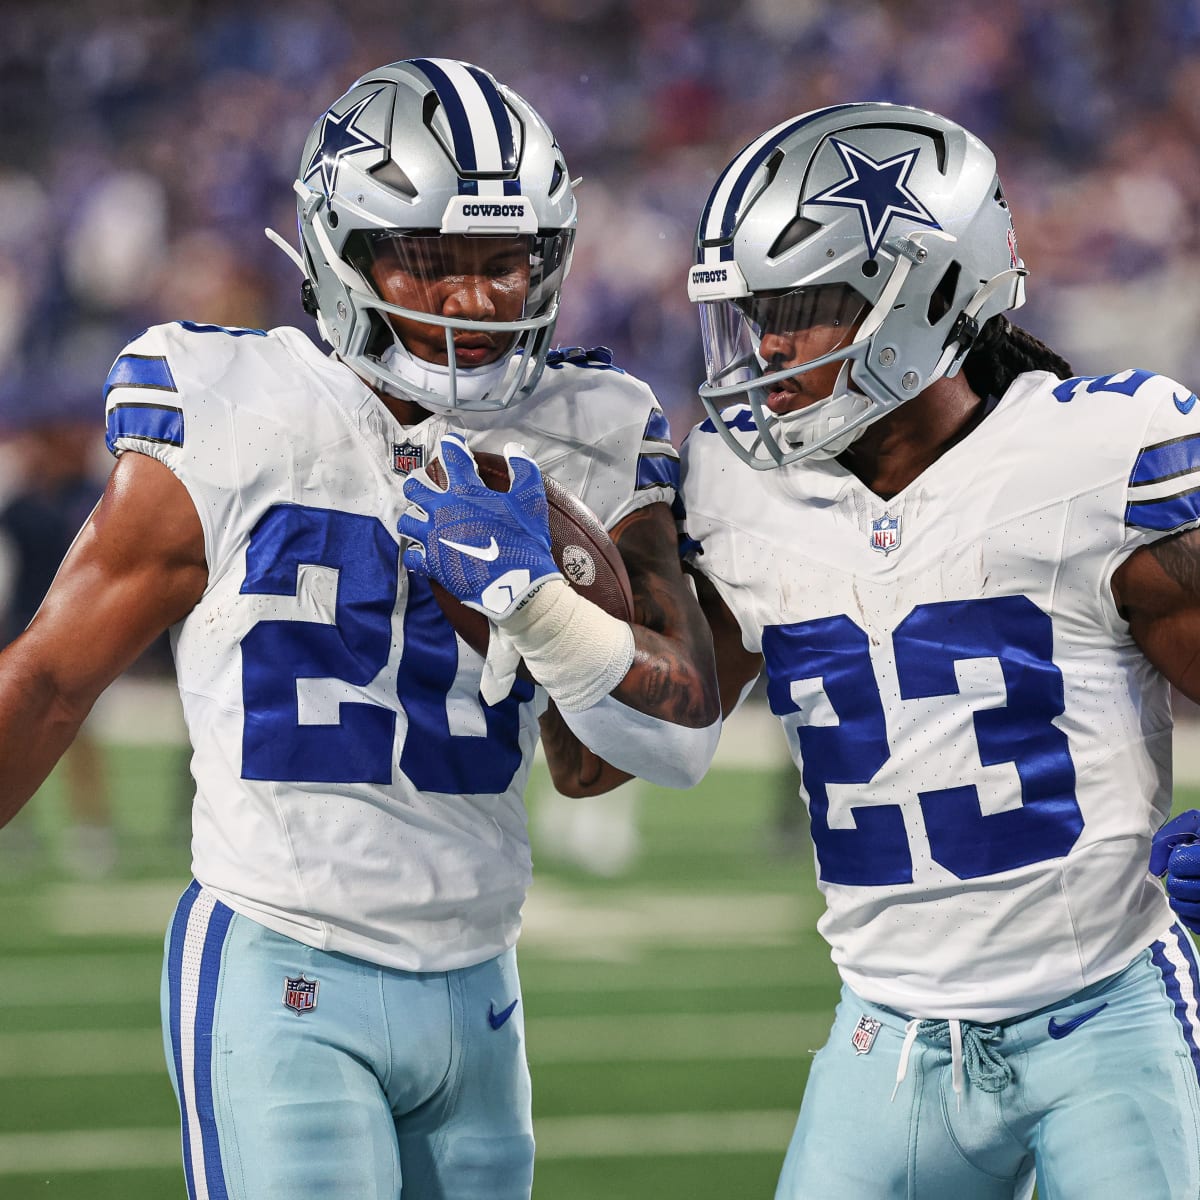 Complimentary Football' Key to Dallas Cowboys' Blowout vs. New